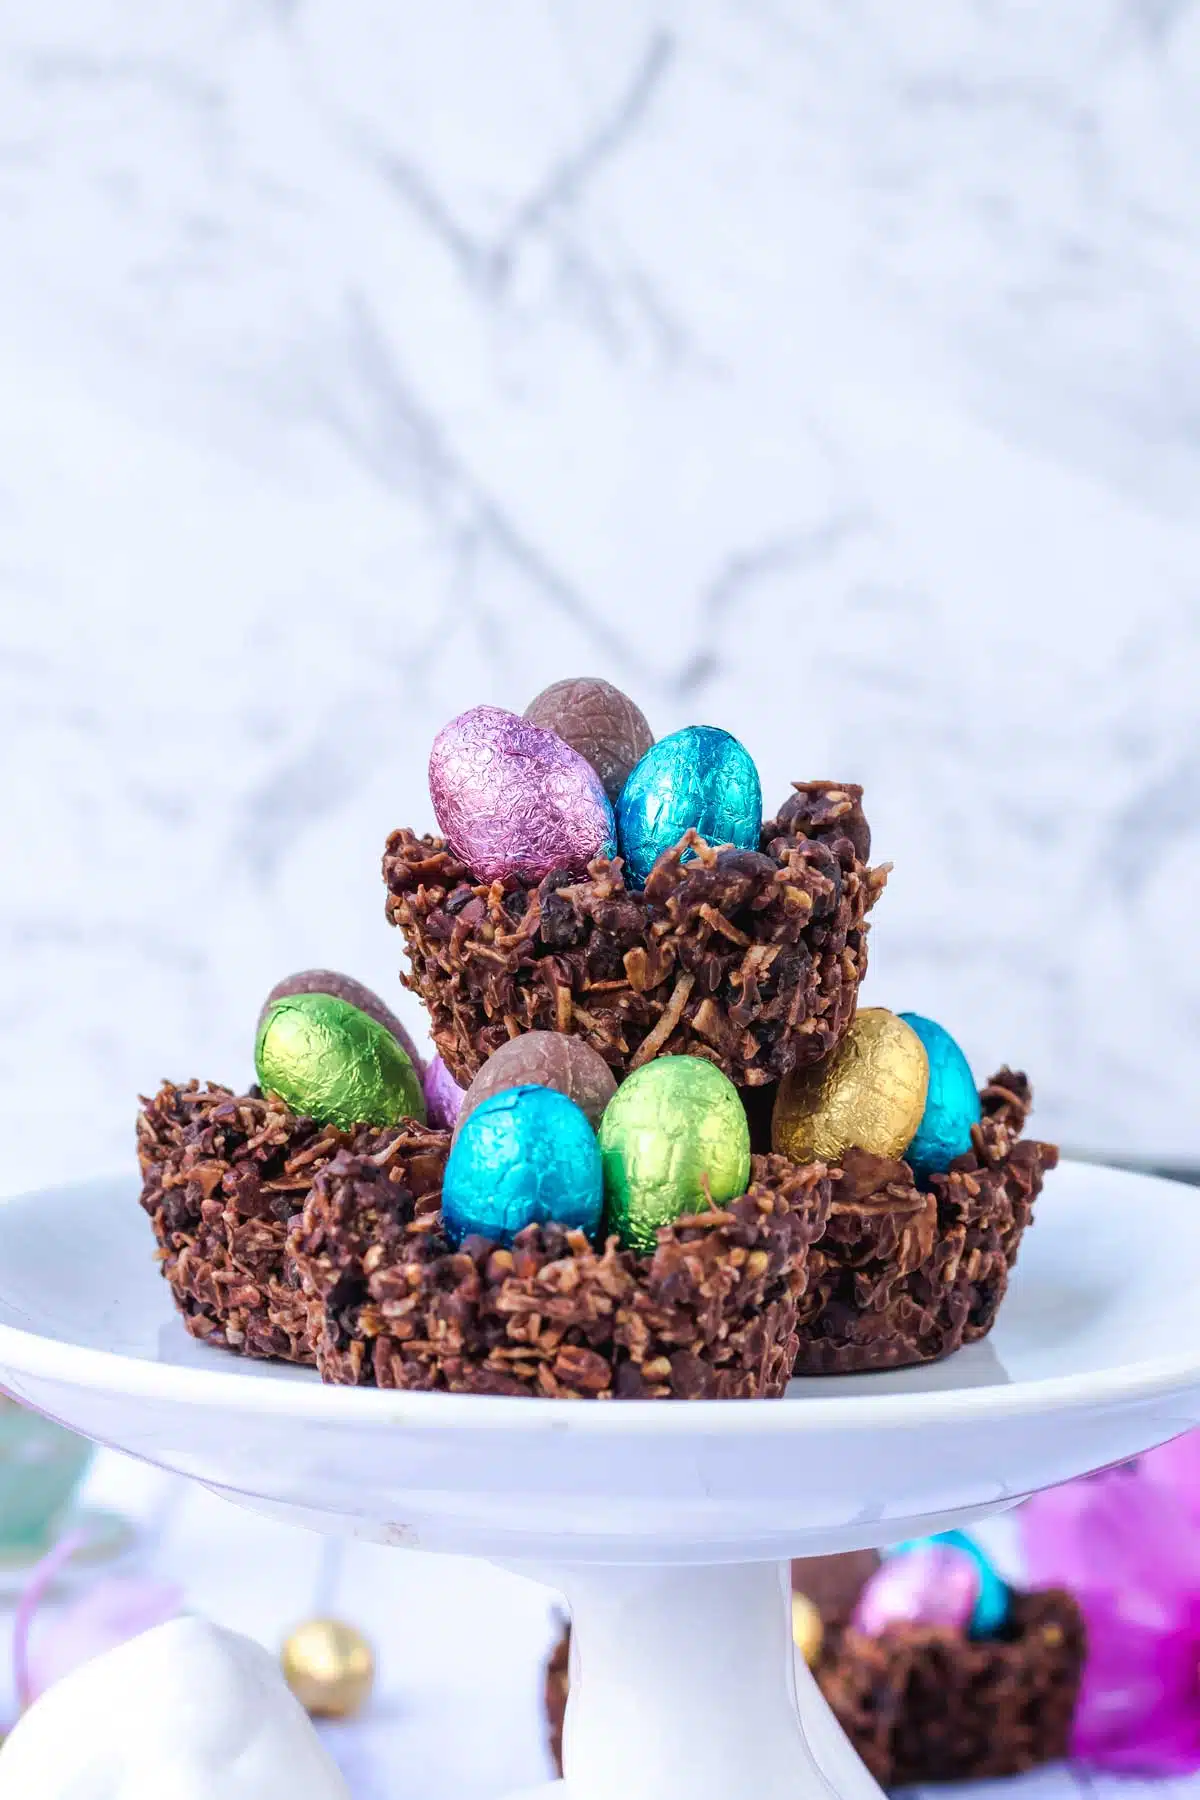 Three chocolate Easter nests have been piled onto a platter, which is a white rabbit holding a plate up on its feet. Other chocolate Easter nests can be seen on the table surrounding the rabbit.